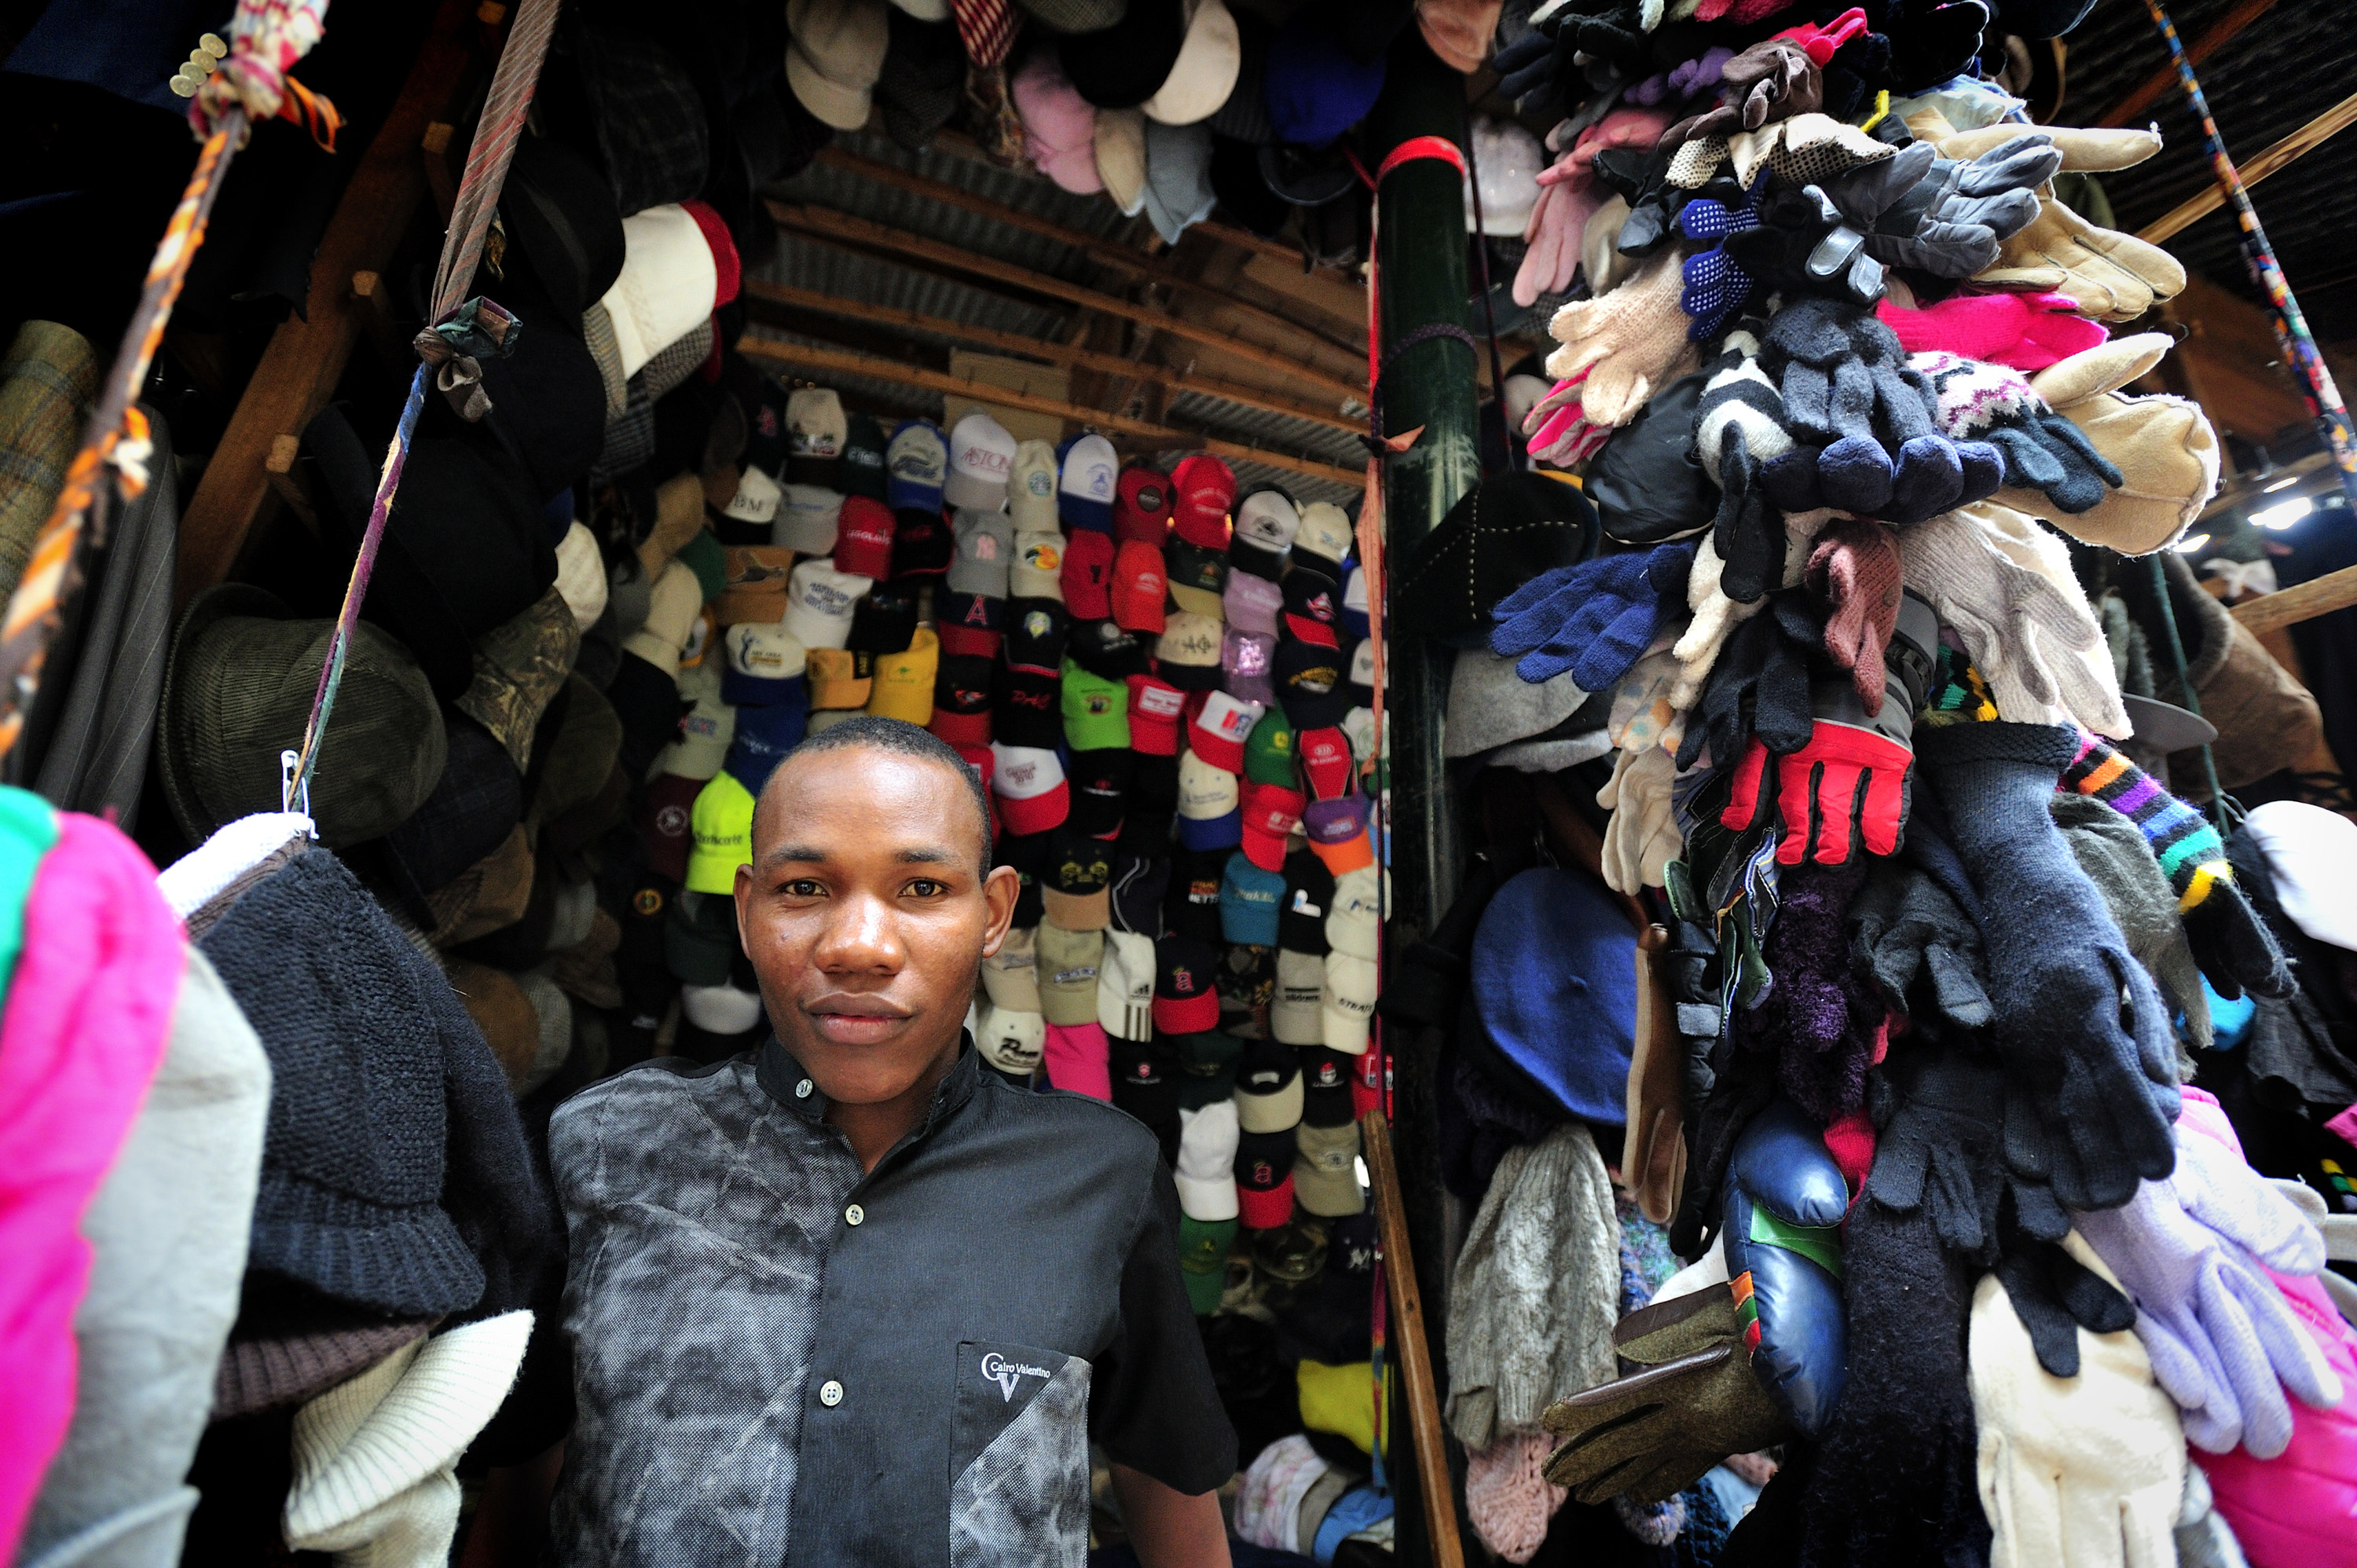 Ugandan shopkeep stands with his store items